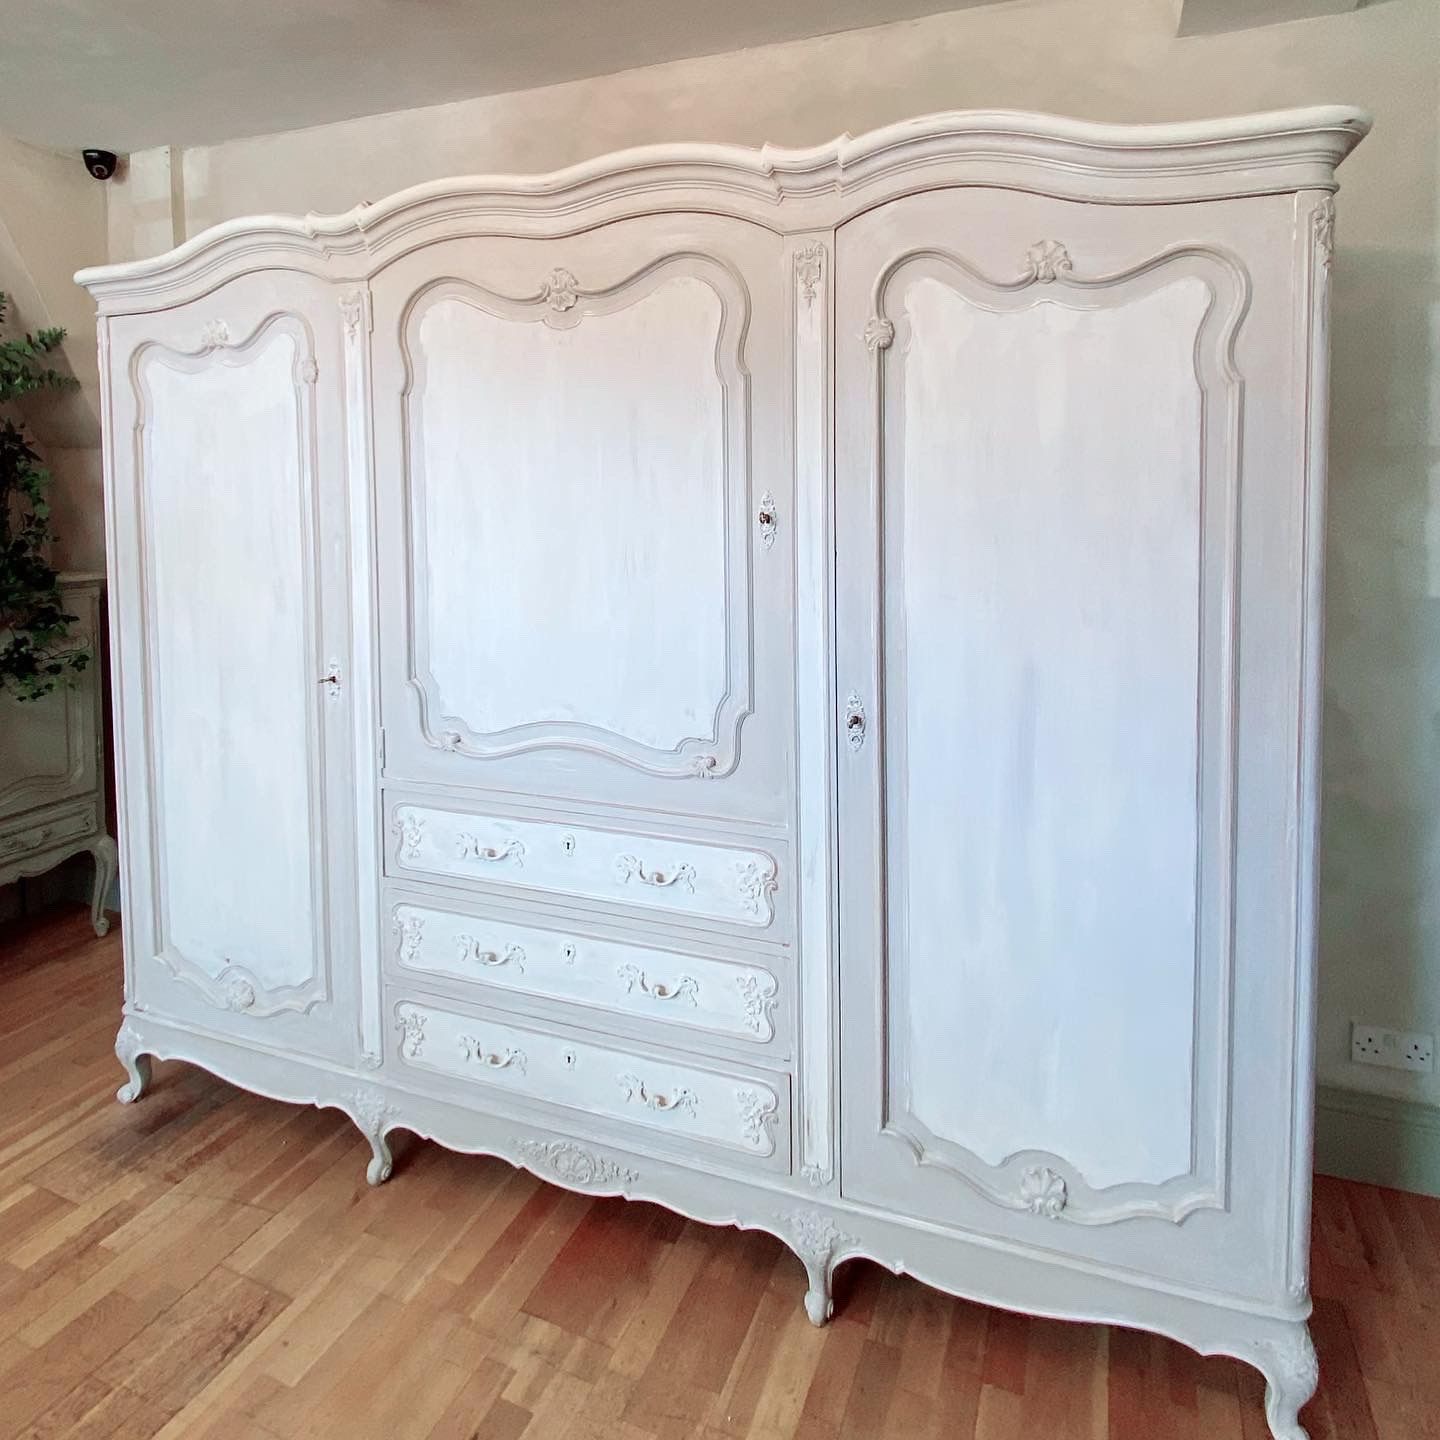 French 3 Door Armoire | Village Chic Throughout 3 Door French Wardrobes (View 3 of 20)